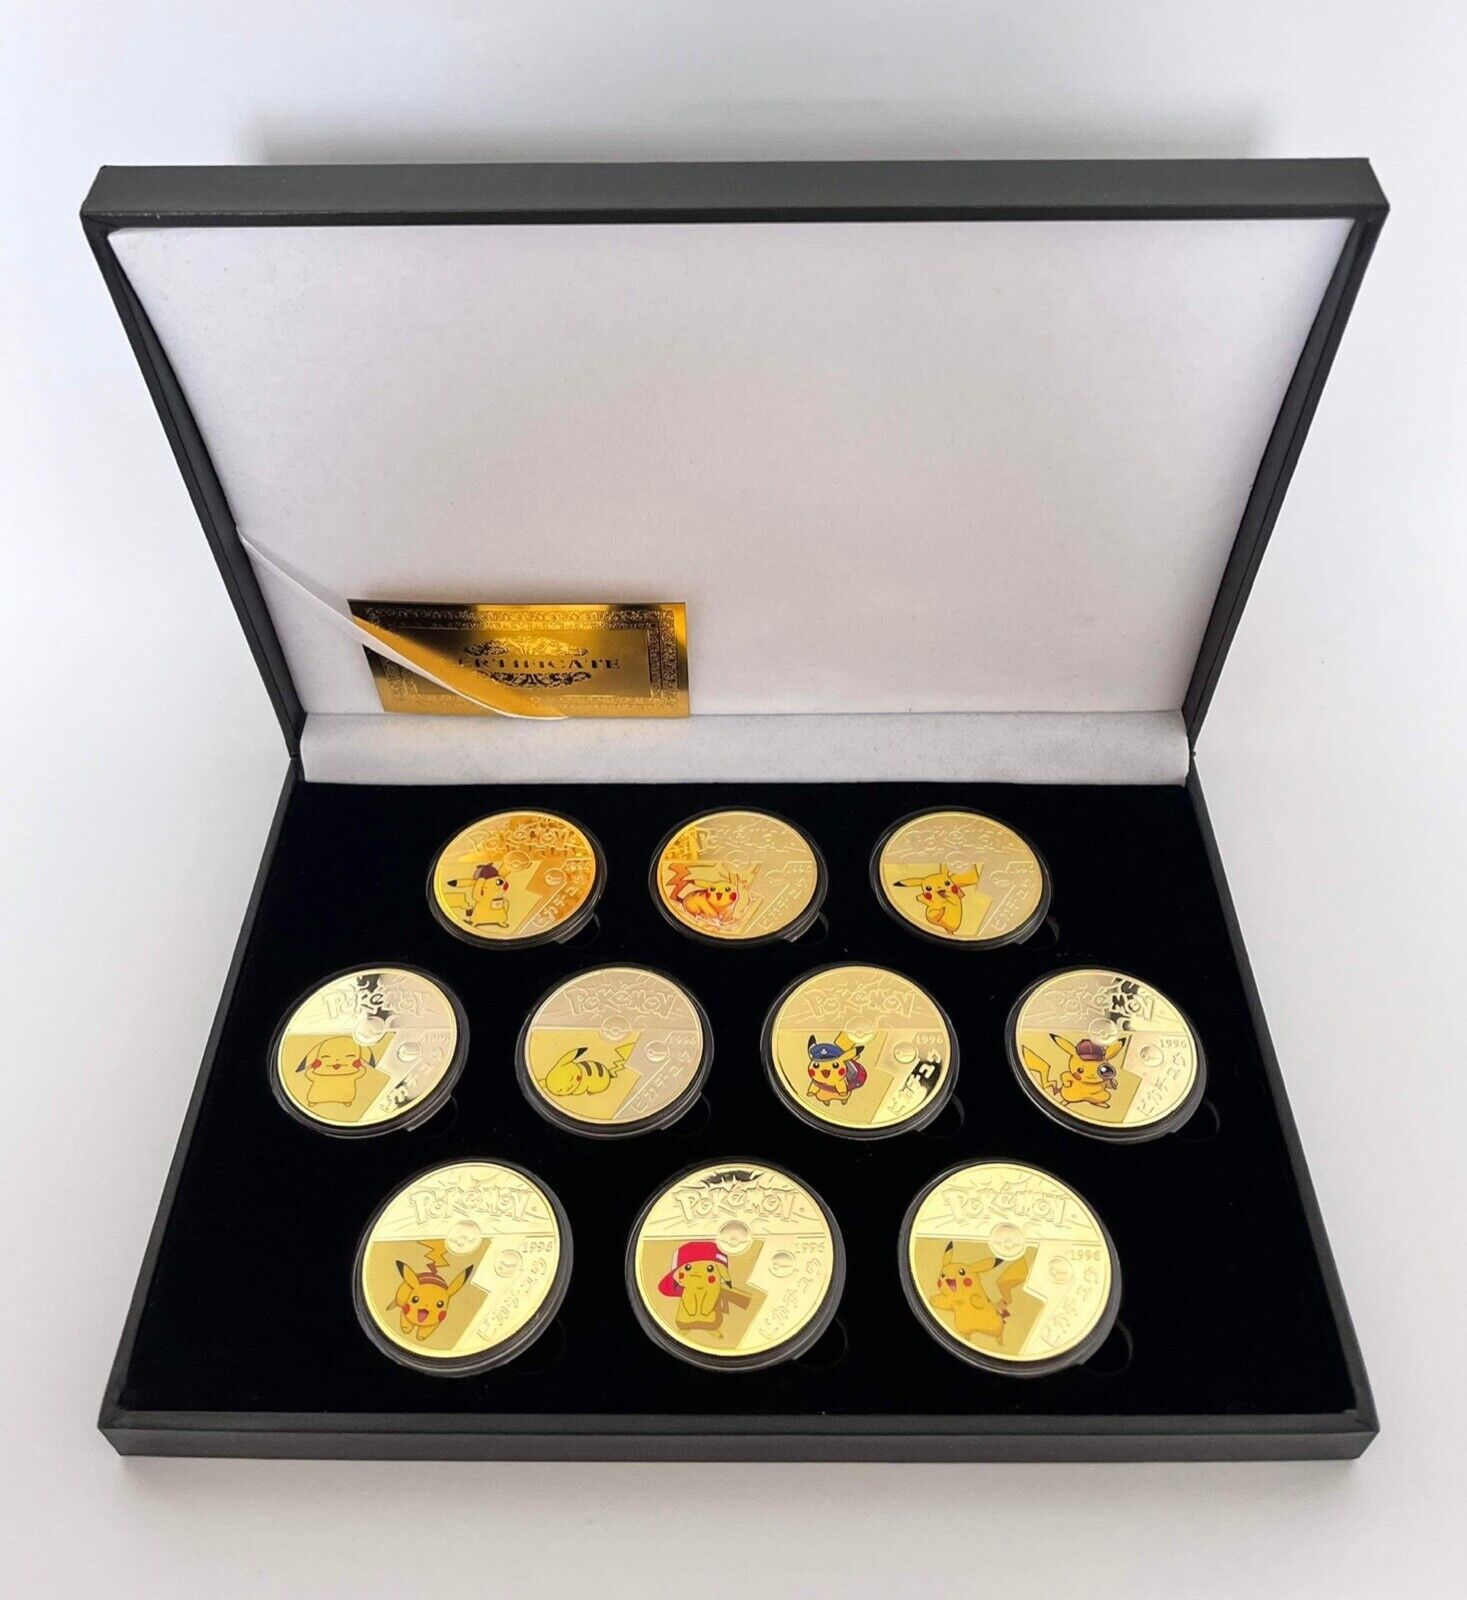 x10 Pokemon Pikachu Gold Plated Collectible Coins Set In A Black Display Box